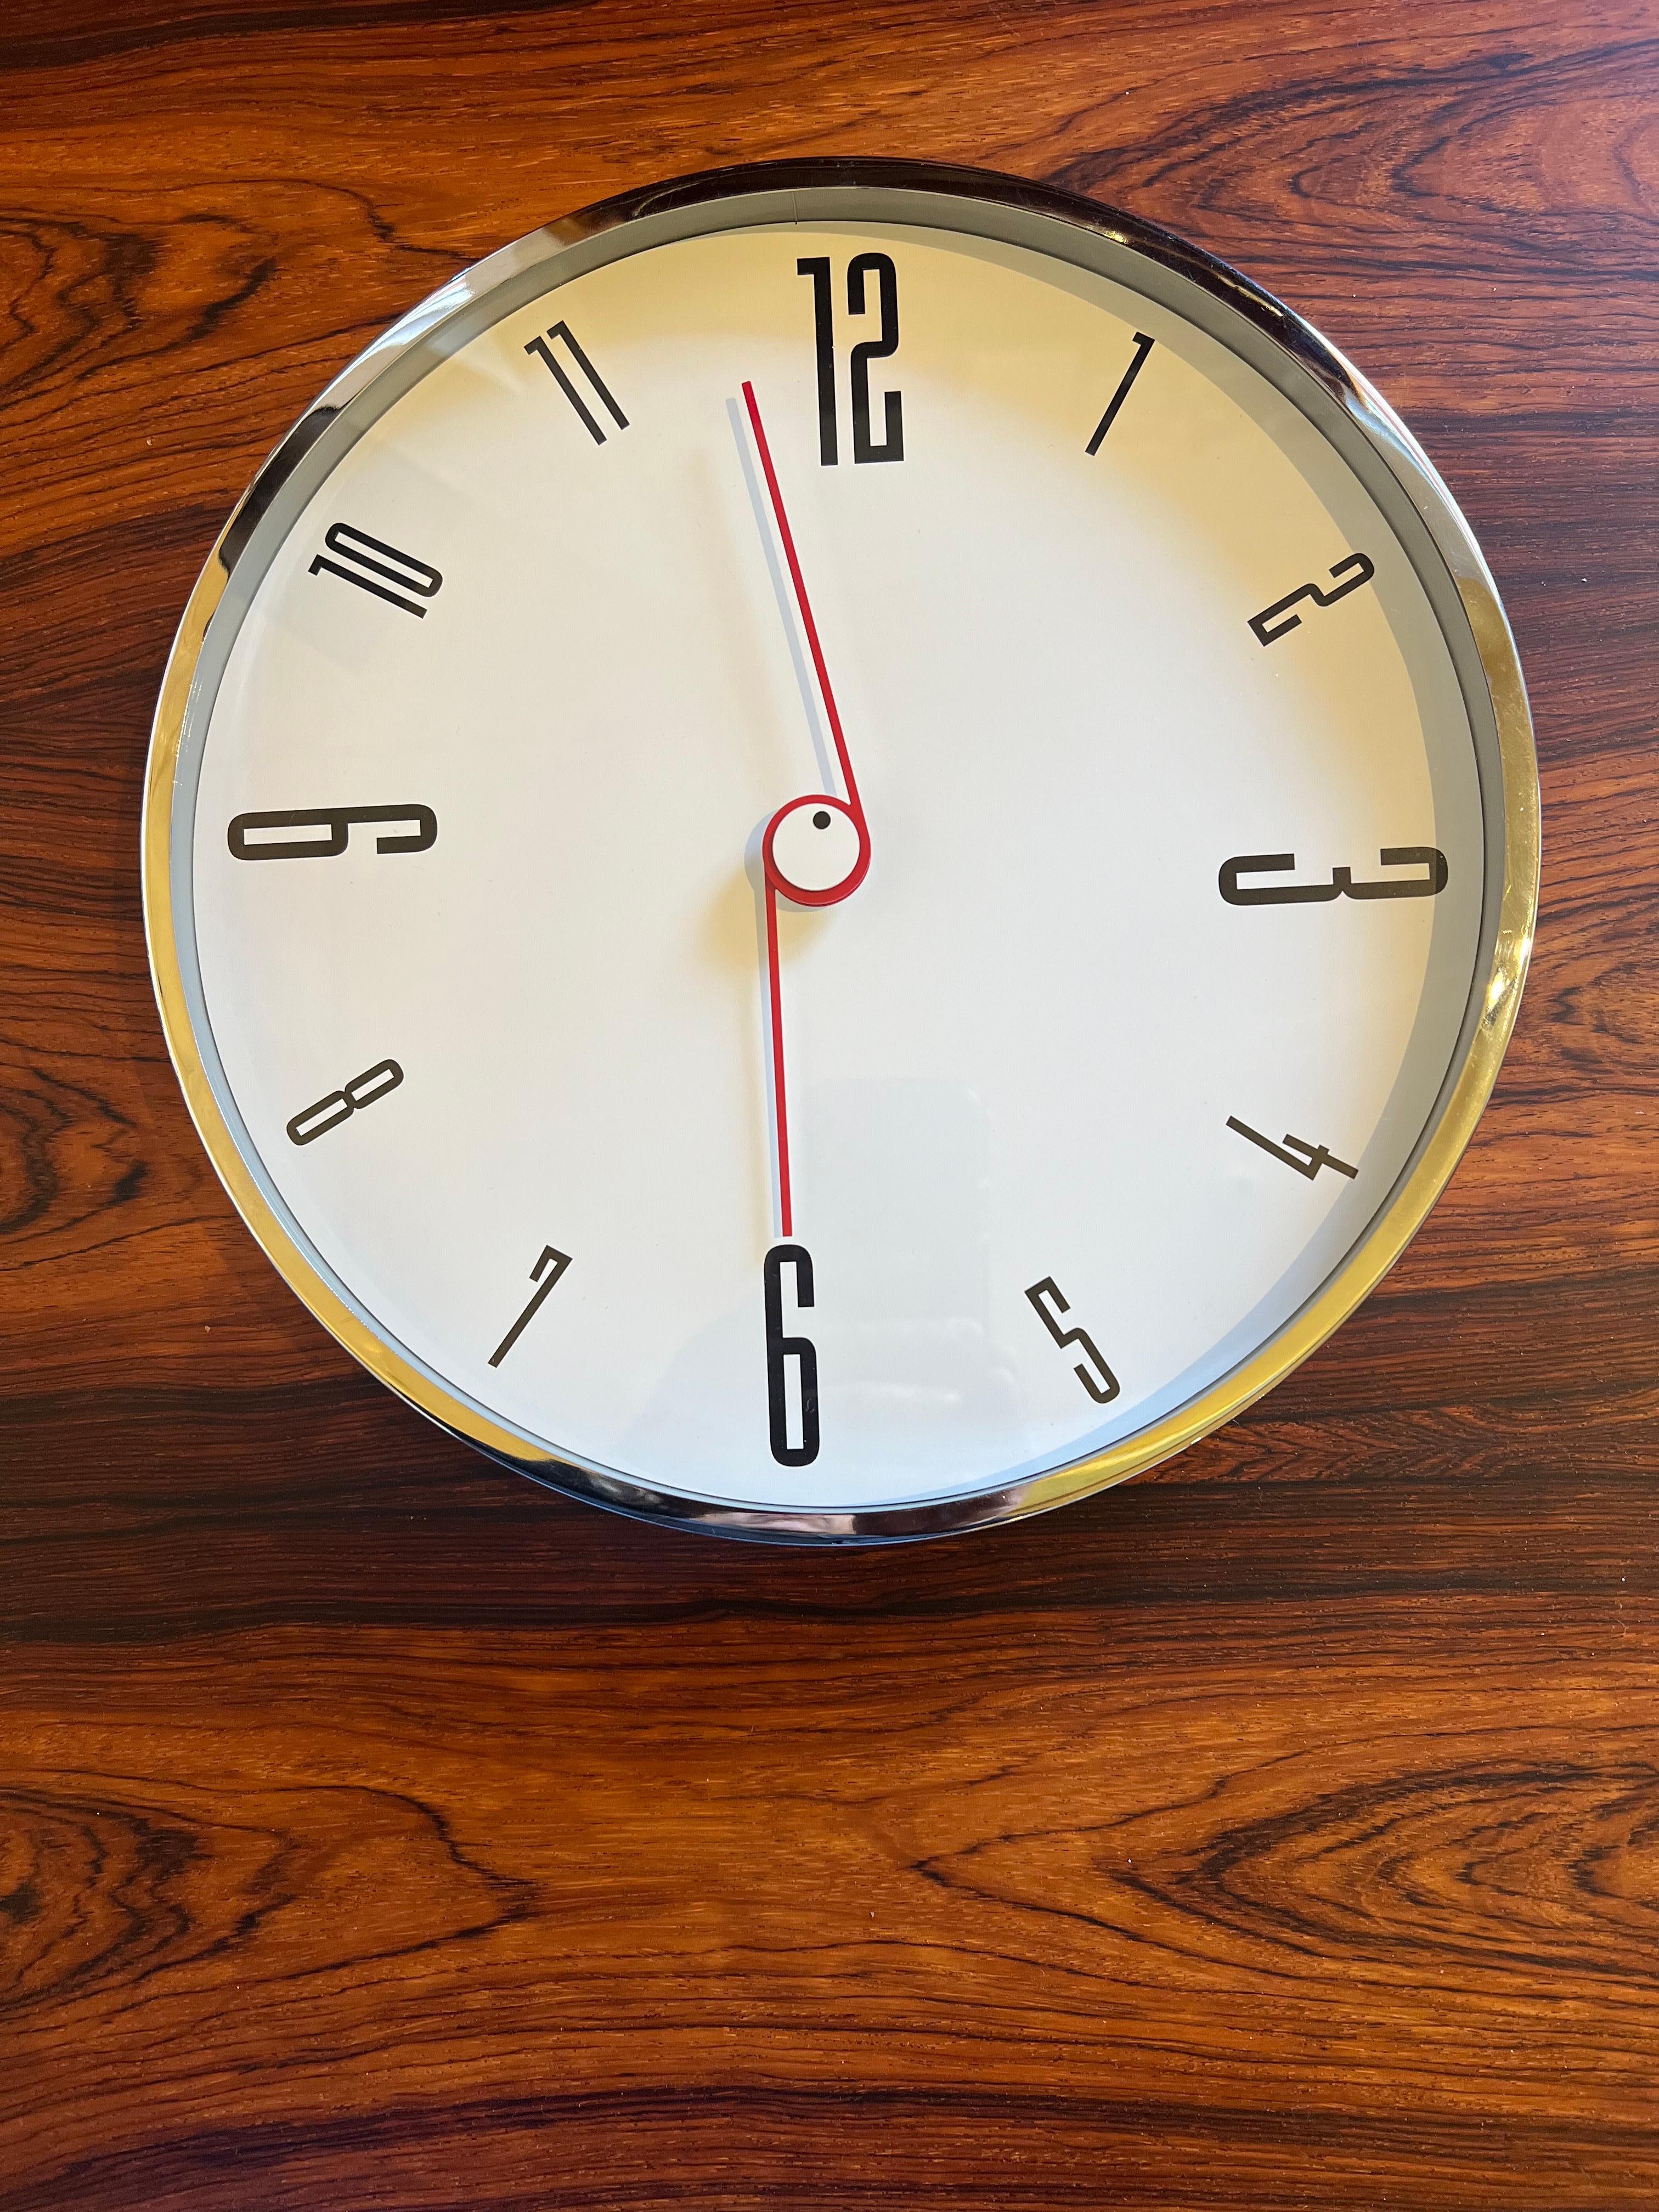 This very rare and collectible wall clock, circa 1980's a great postmodern design chrome plated frame and glass top unique piece nice handles battery operated.